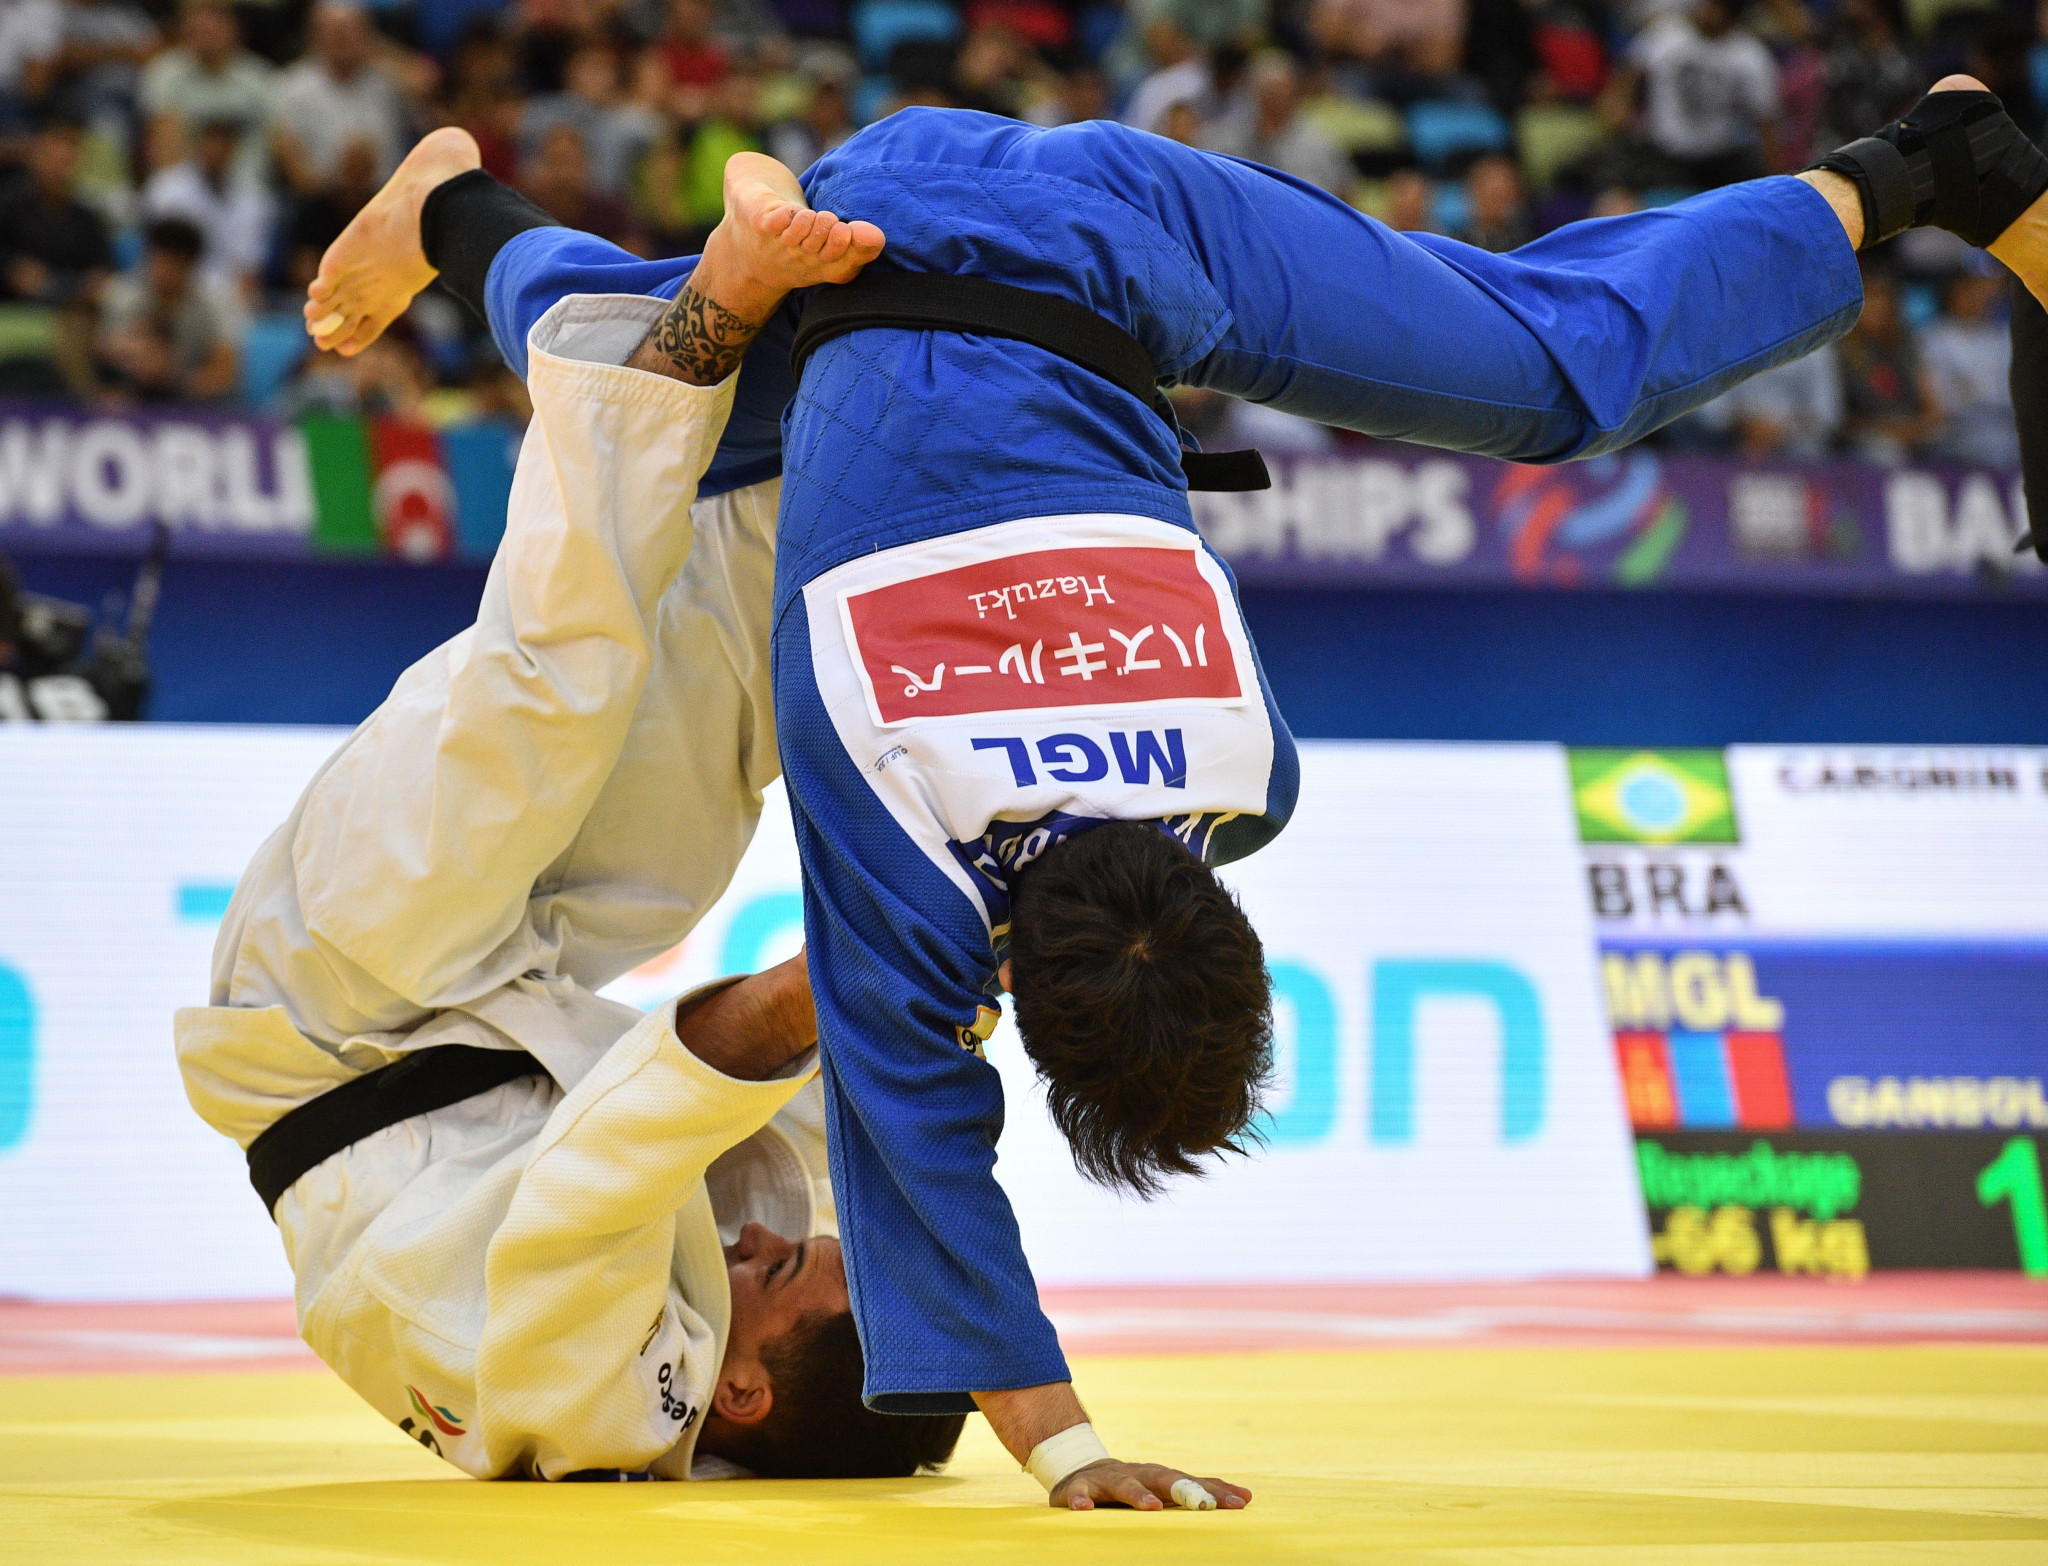 Brazil claim two gold medals on opening day of Pan American Senior Judo Championships